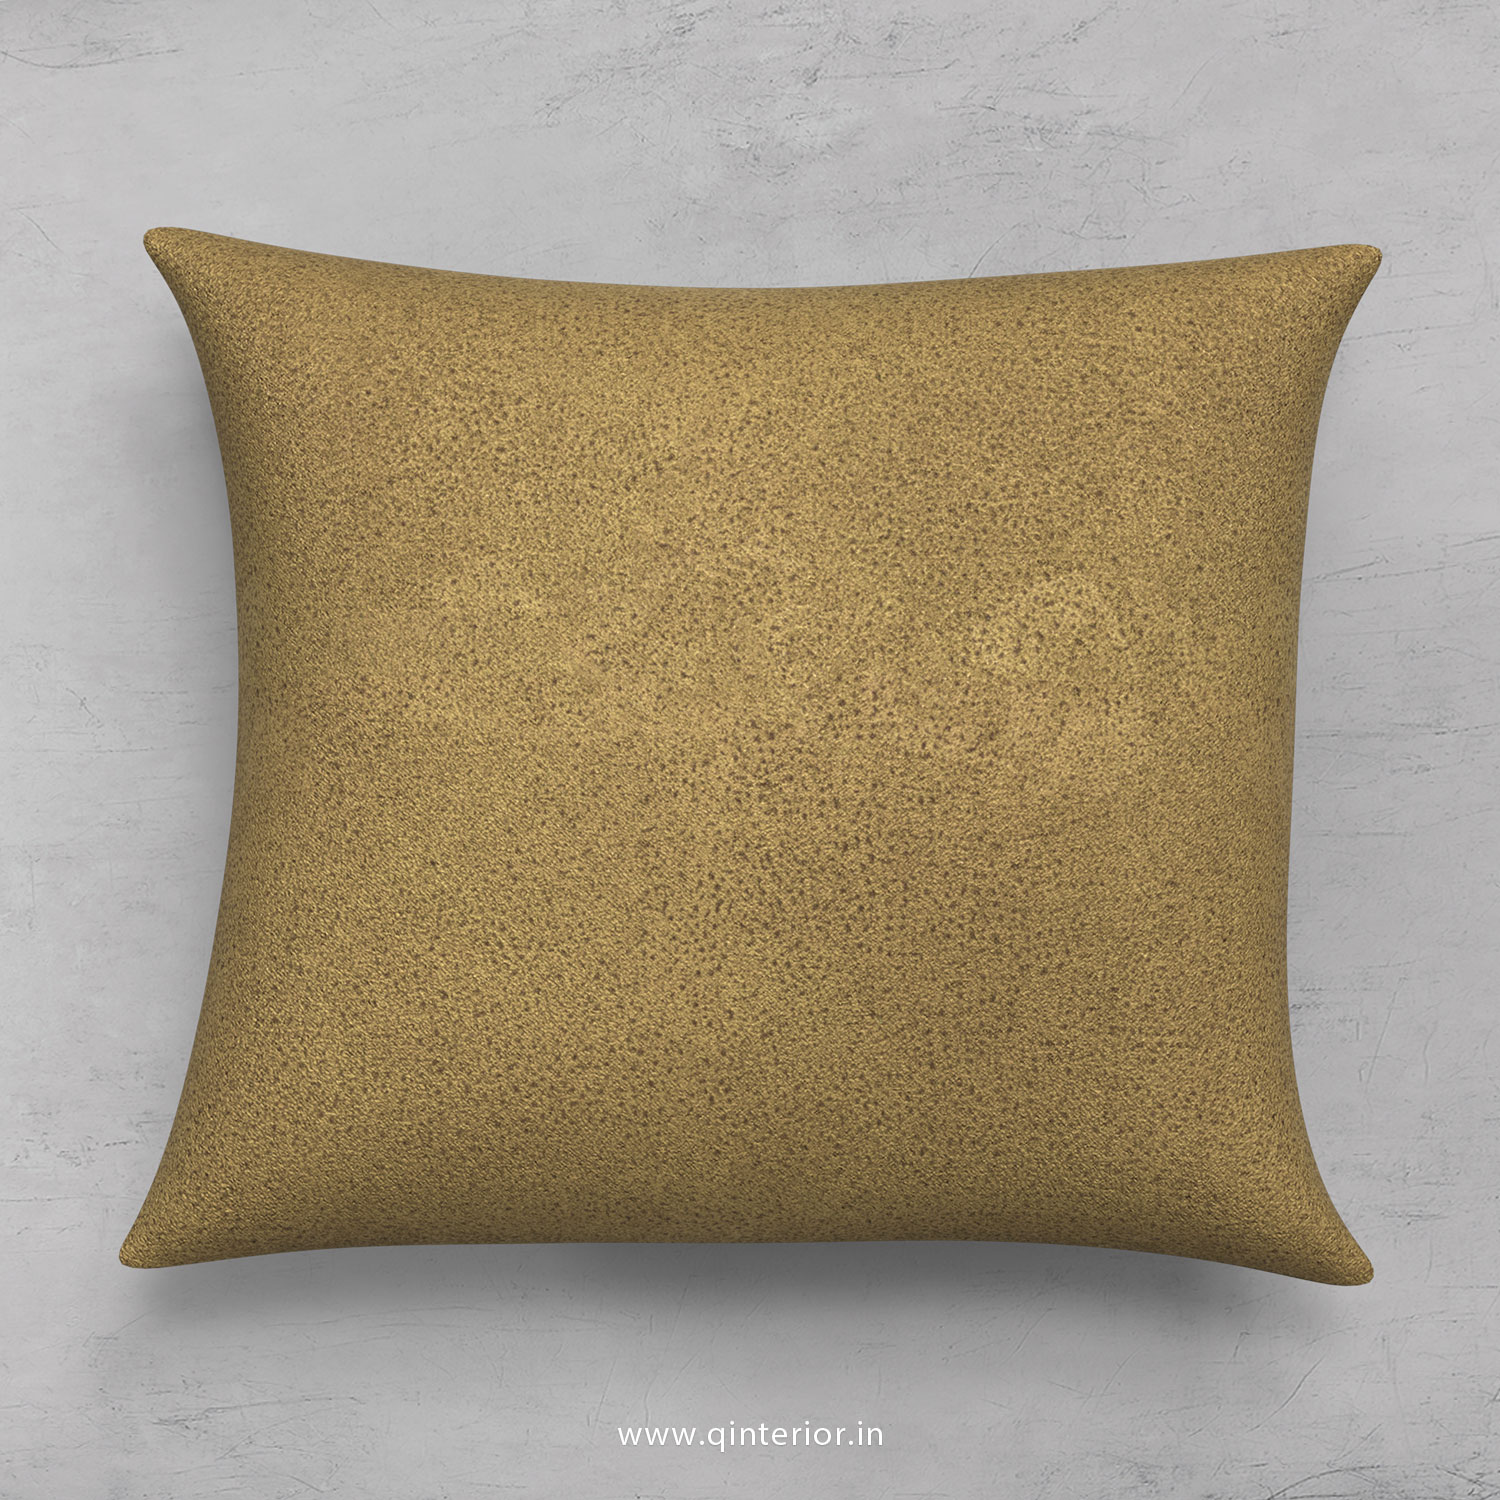 Cushion With Cushion Cover in Fab Leather - CUS001 FL18